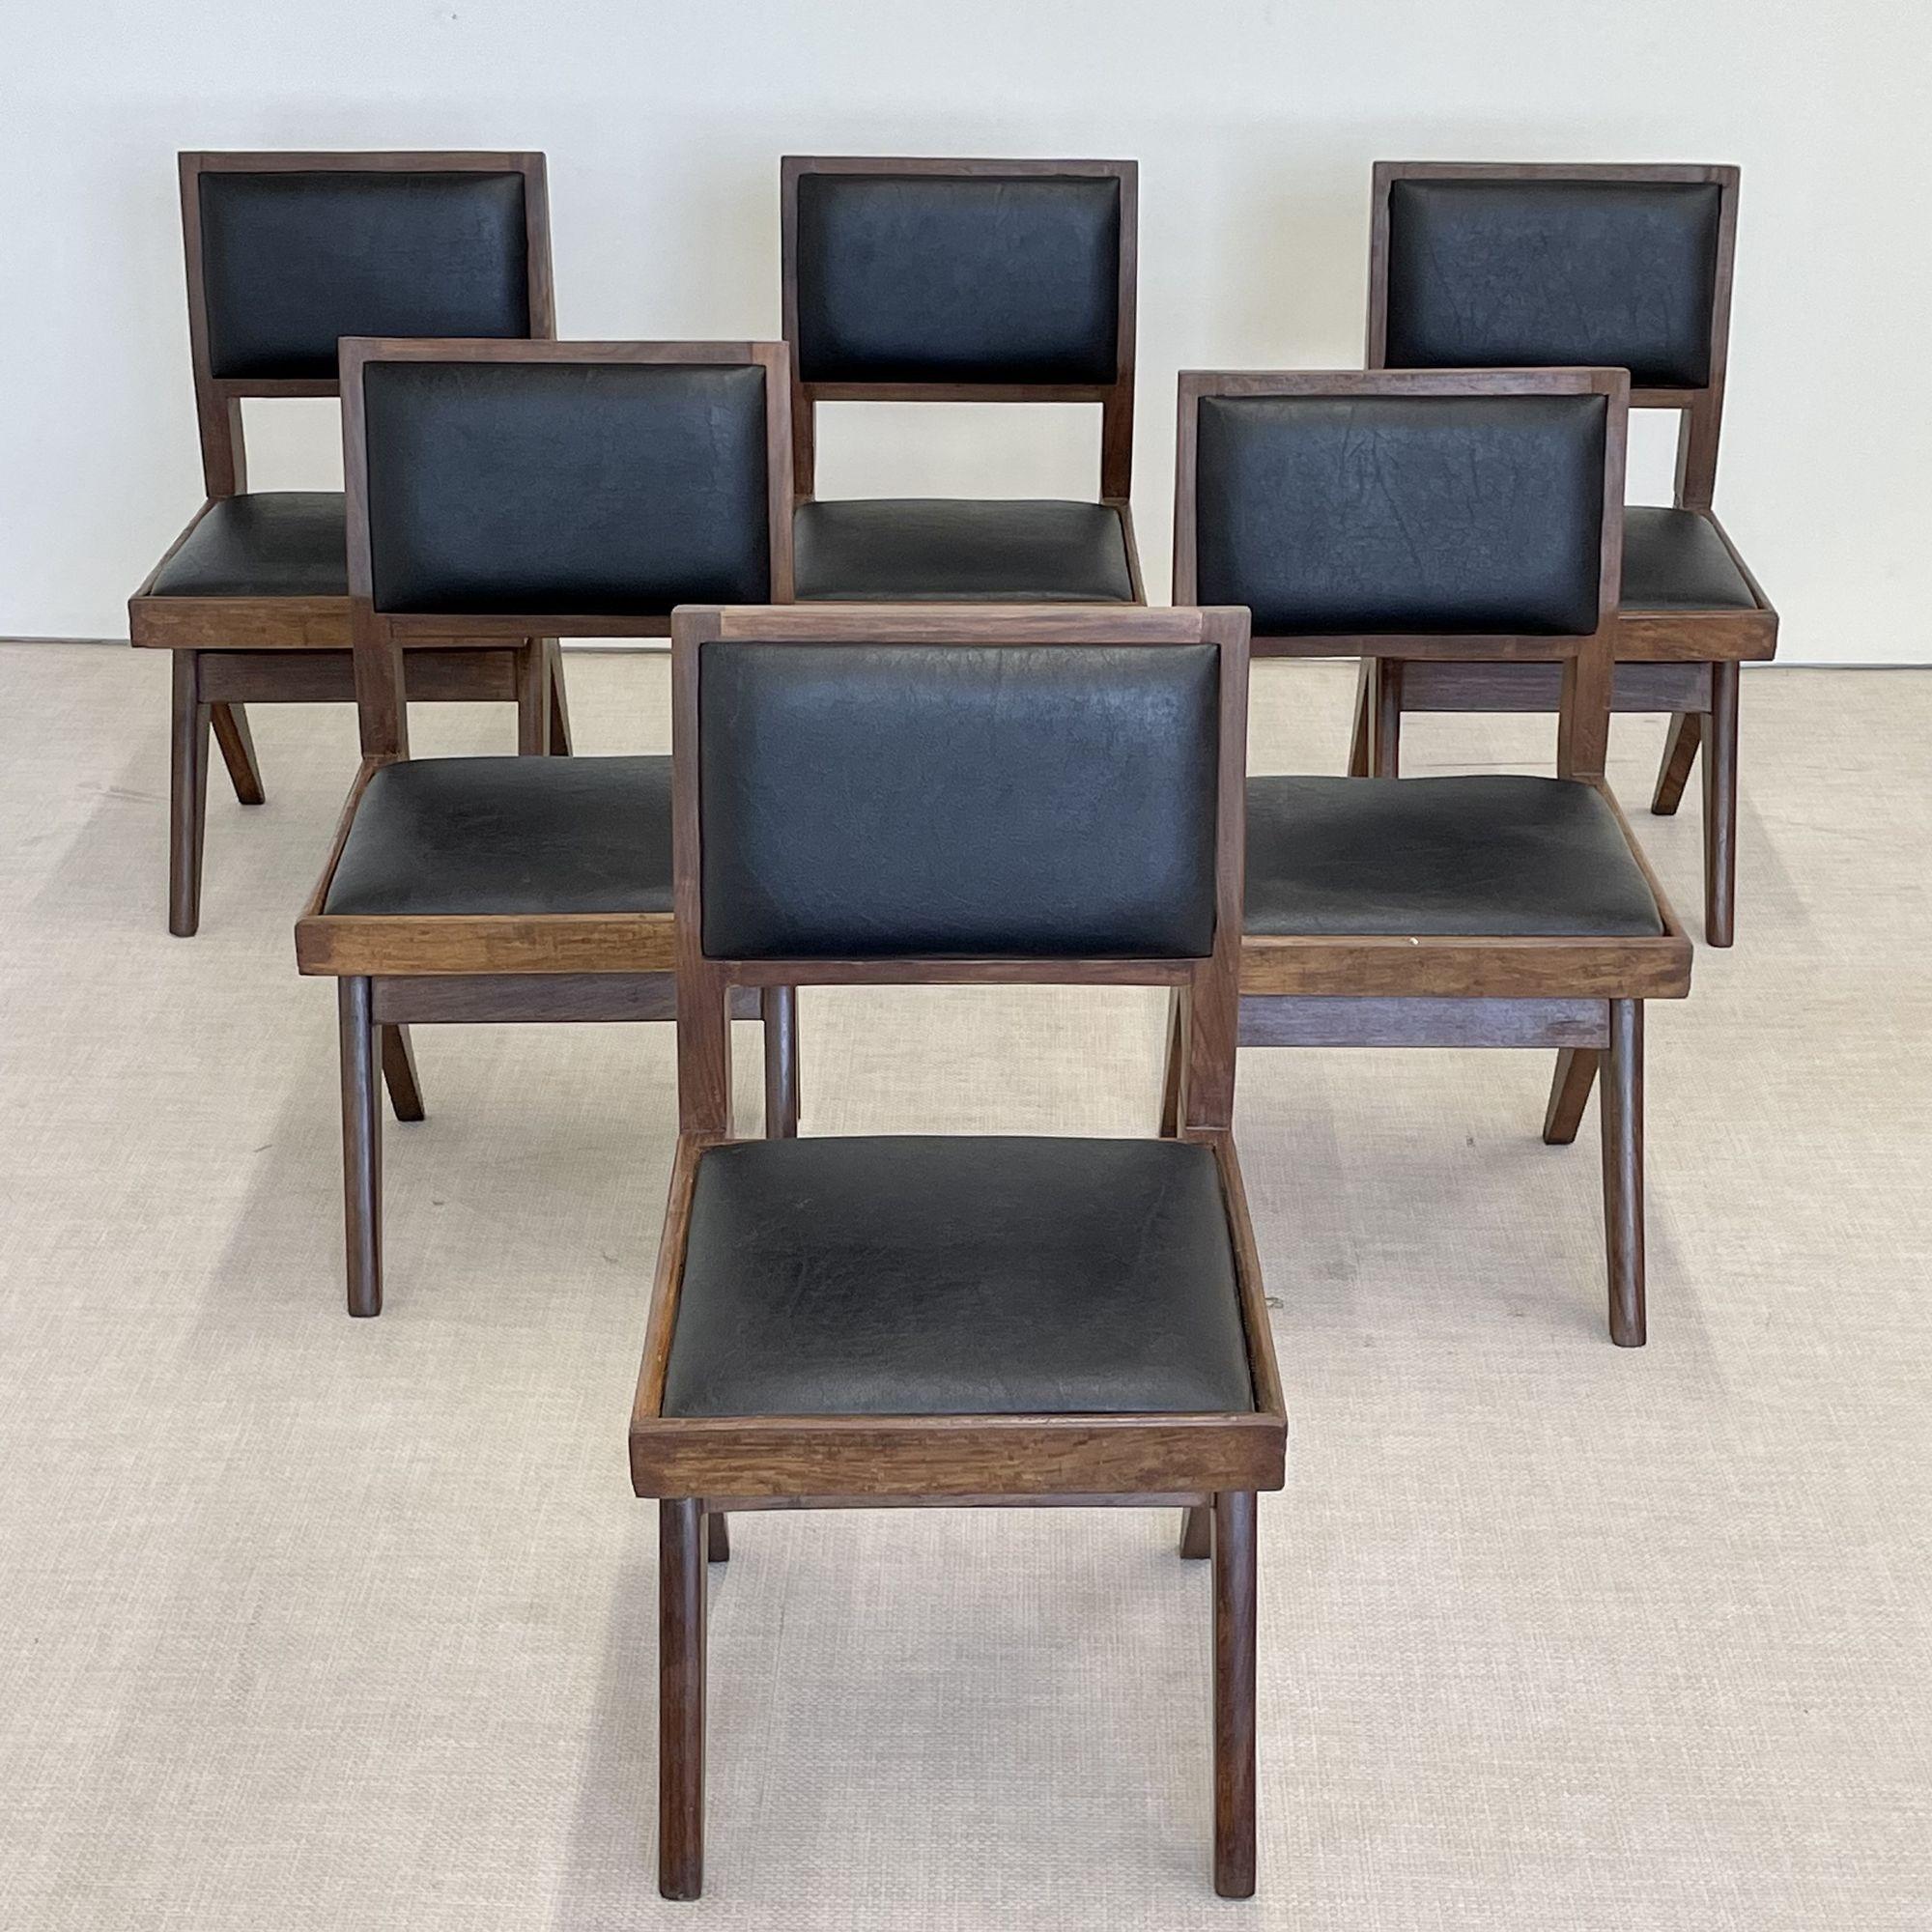 Indian Pierre Jeanneret, French Mid-Century Modern, Six Dining Chairs, Teak, Chandigarh For Sale